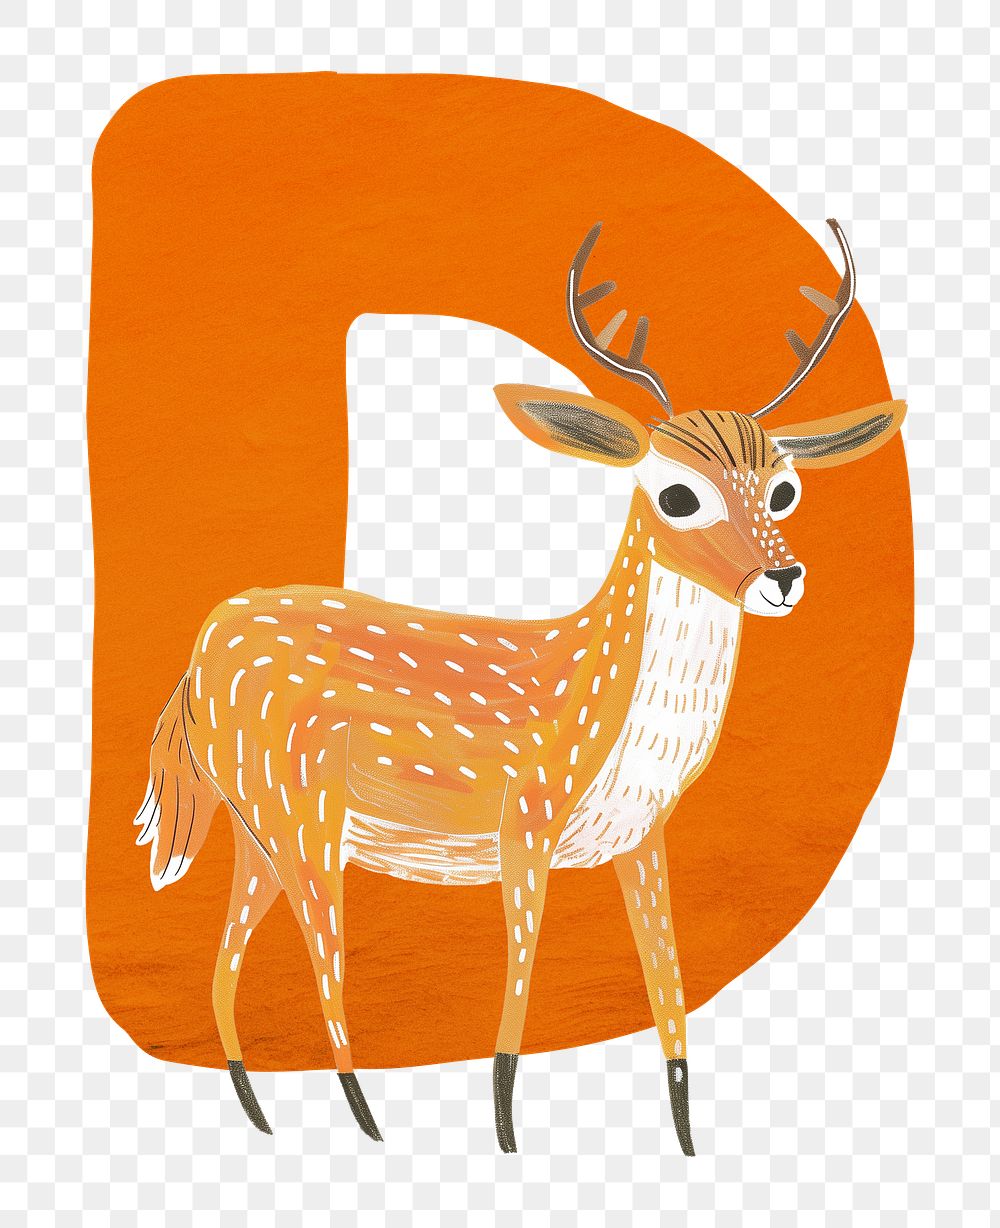 PNG orange letter D with animal character, transparent background